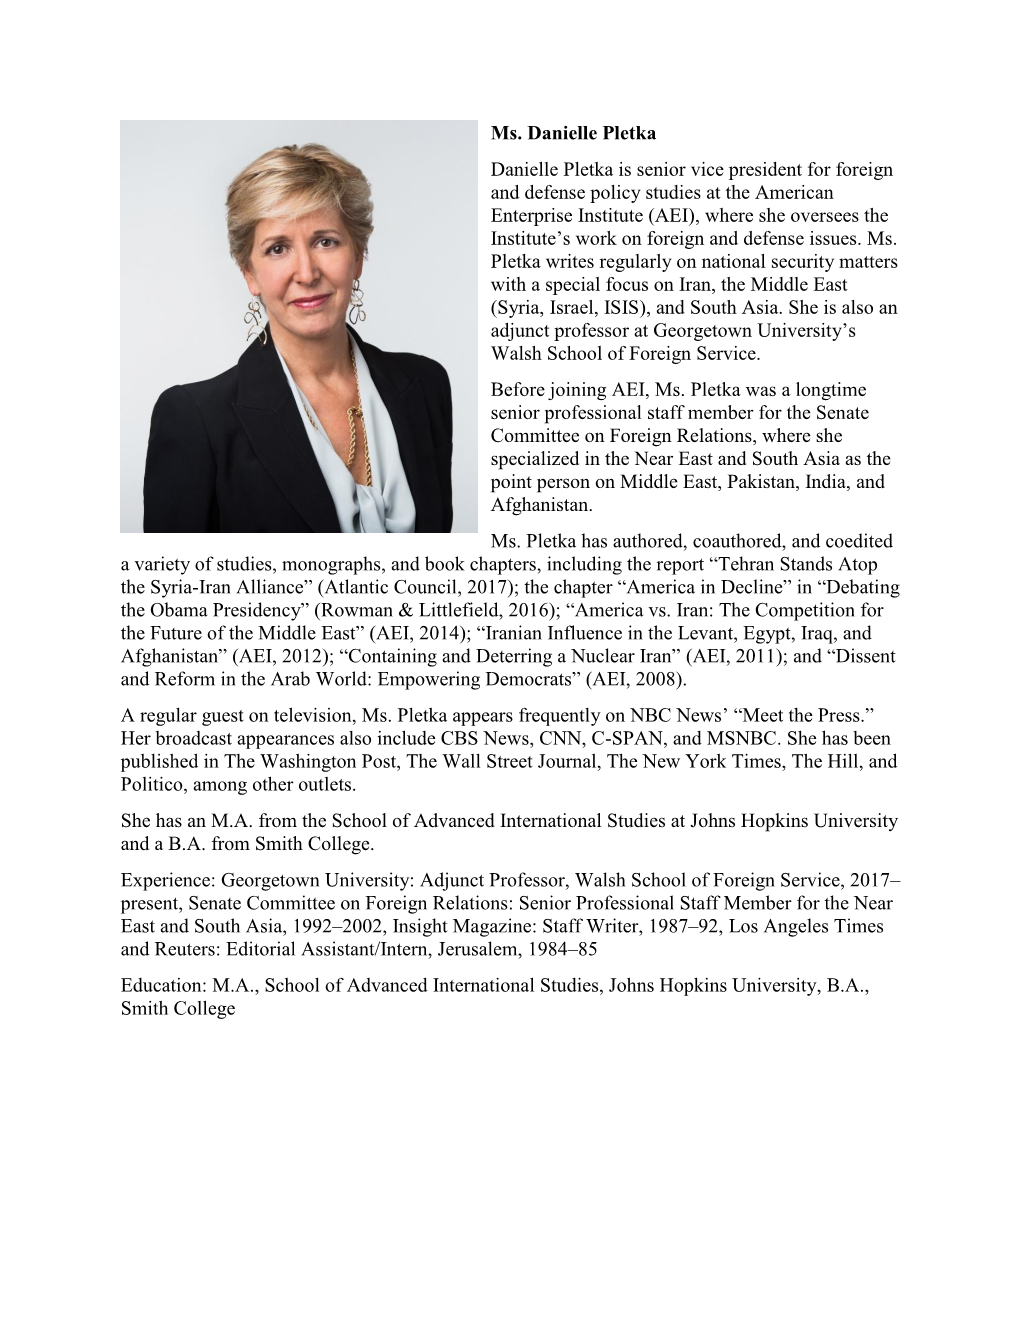 Ms. Danielle Pletka Danielle Pletka Is Senior Vice President for Foreign And